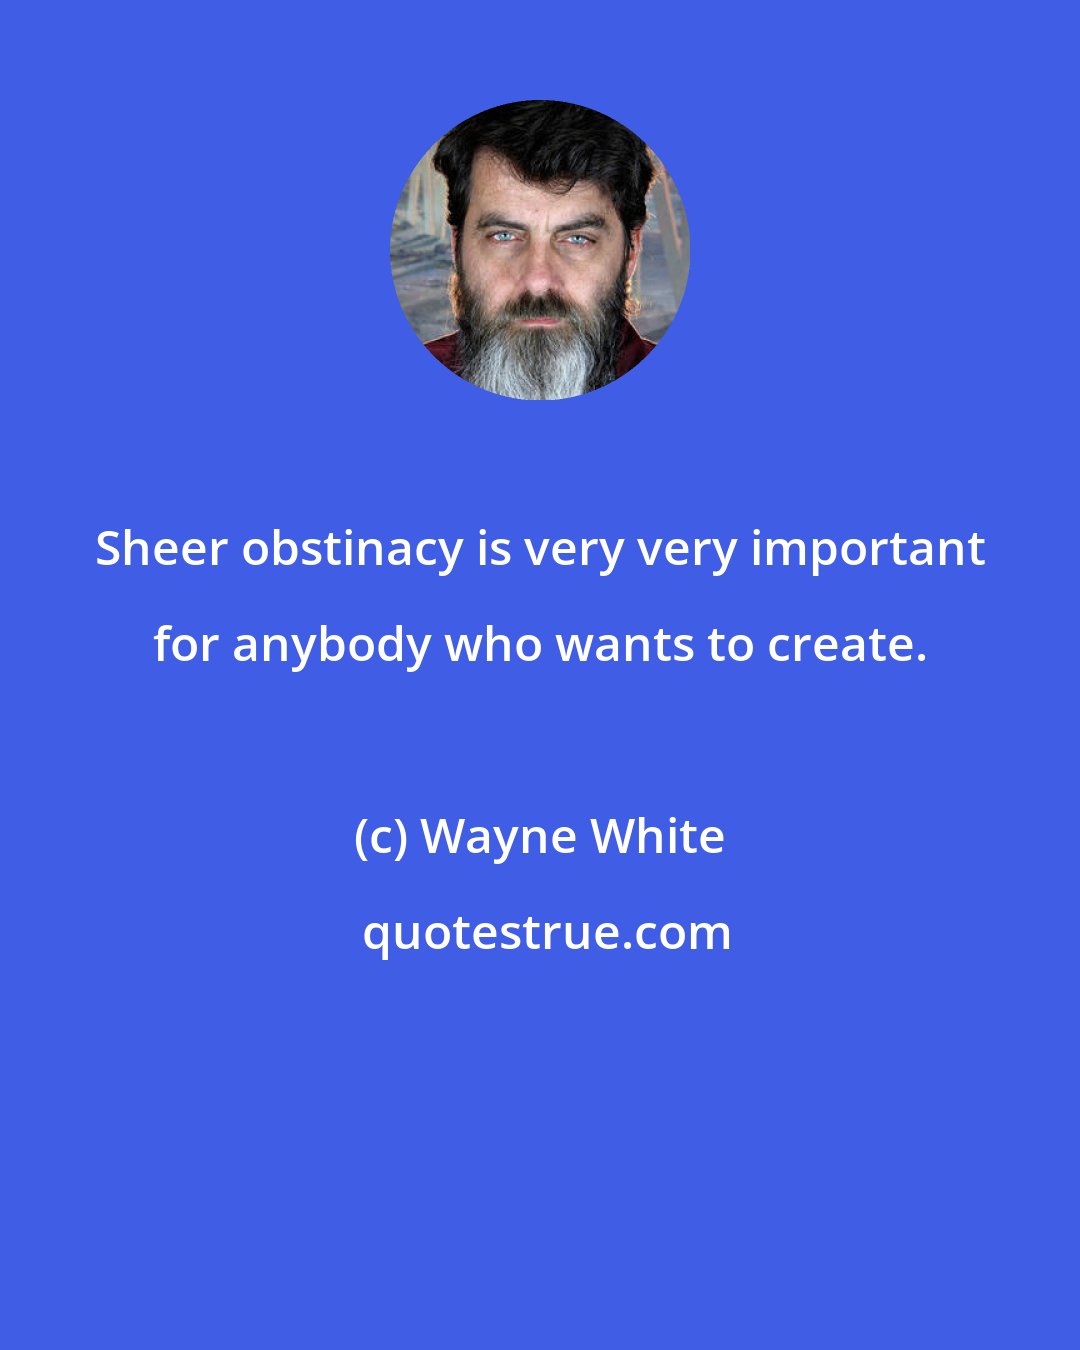 Wayne White: Sheer obstinacy is very very important for anybody who wants to create.